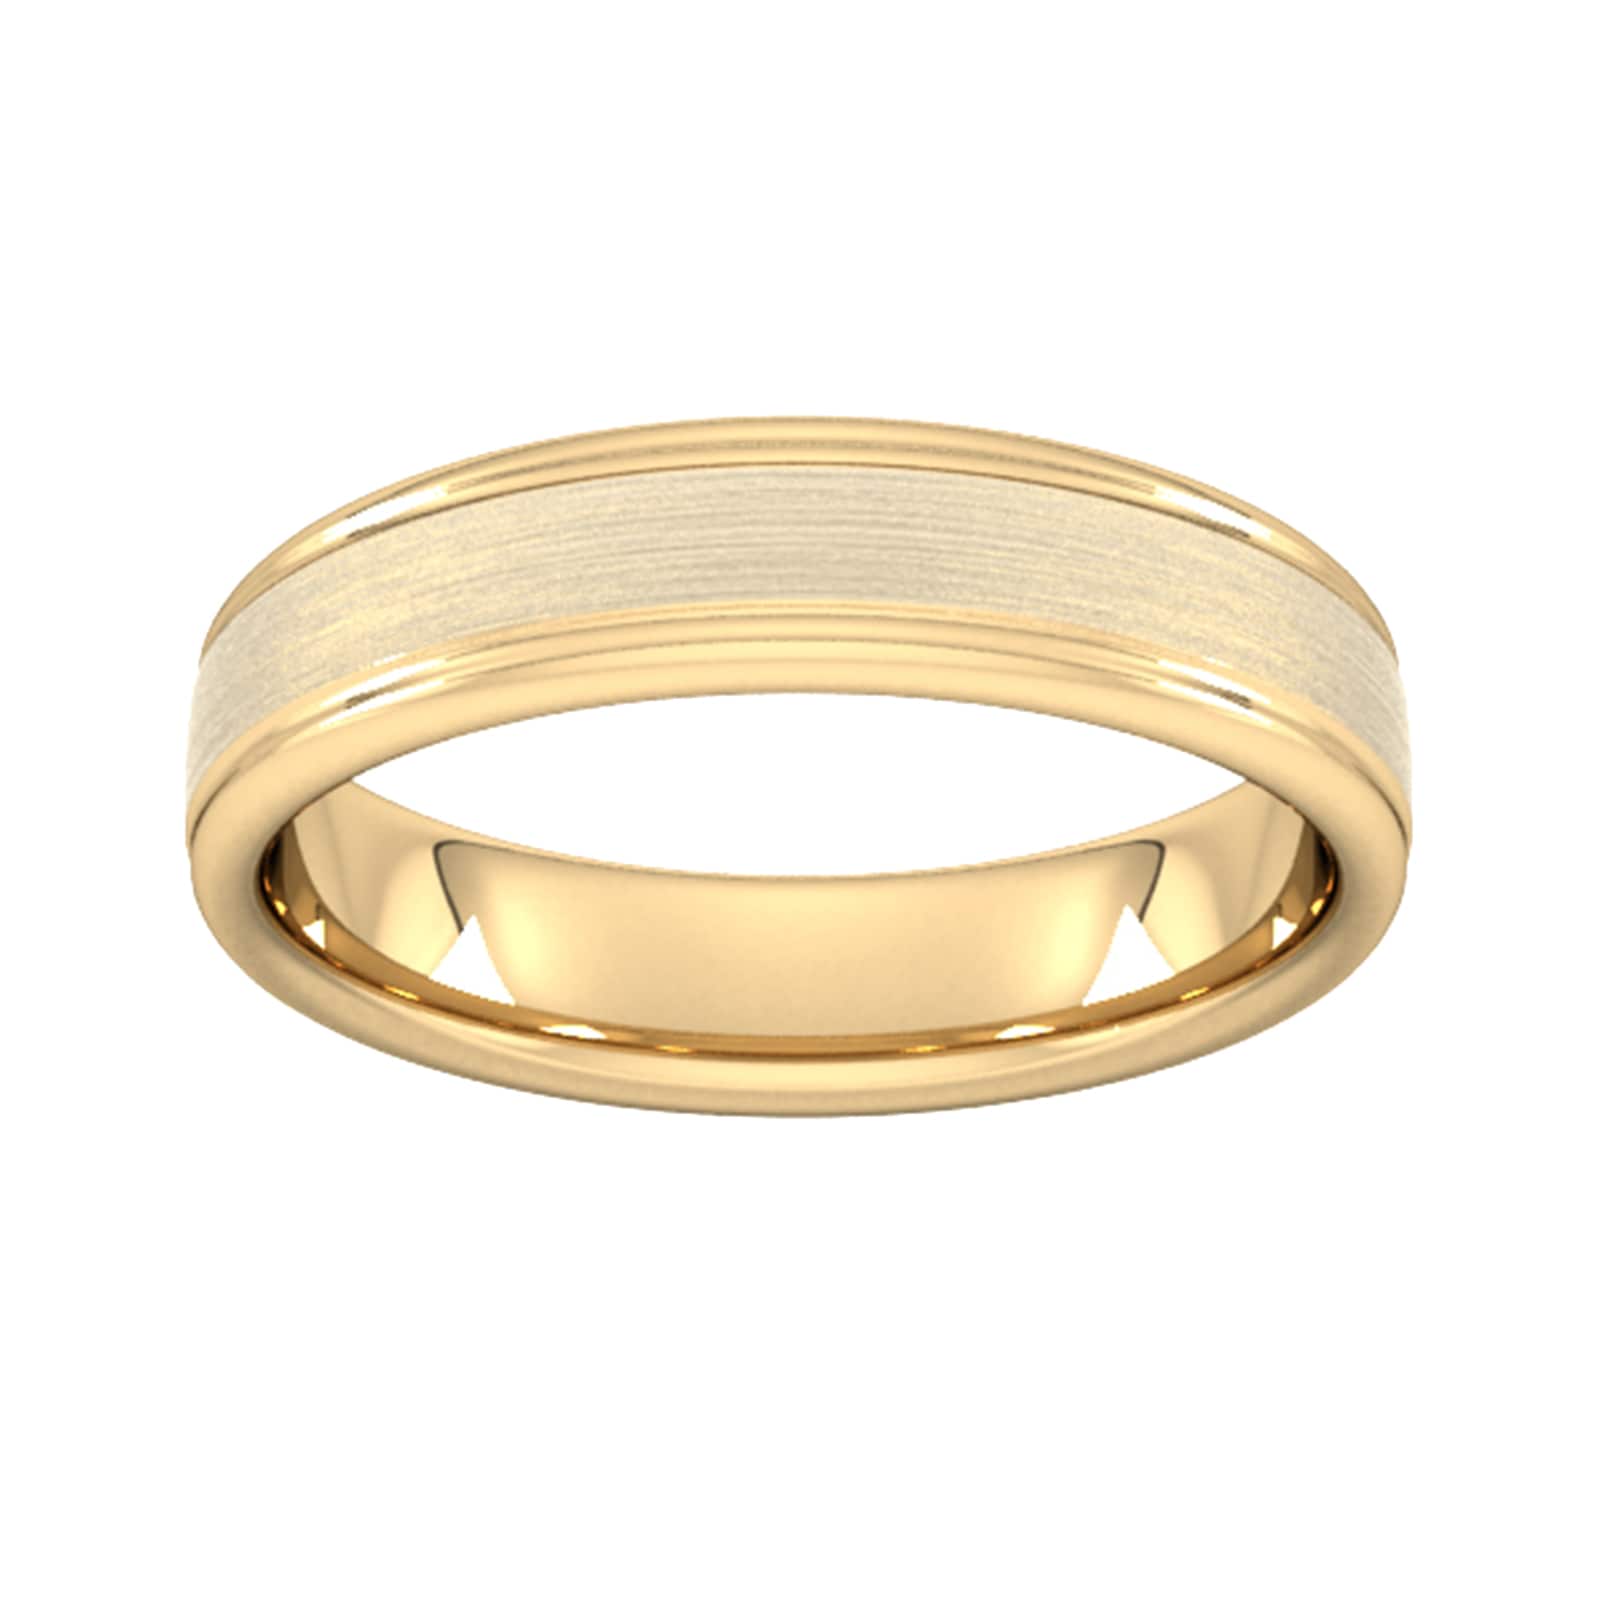 5mm Traditional Court Heavy Matt Centre With Grooves Wedding Ring In 18 Carat Yellow Gold - Ring Size T